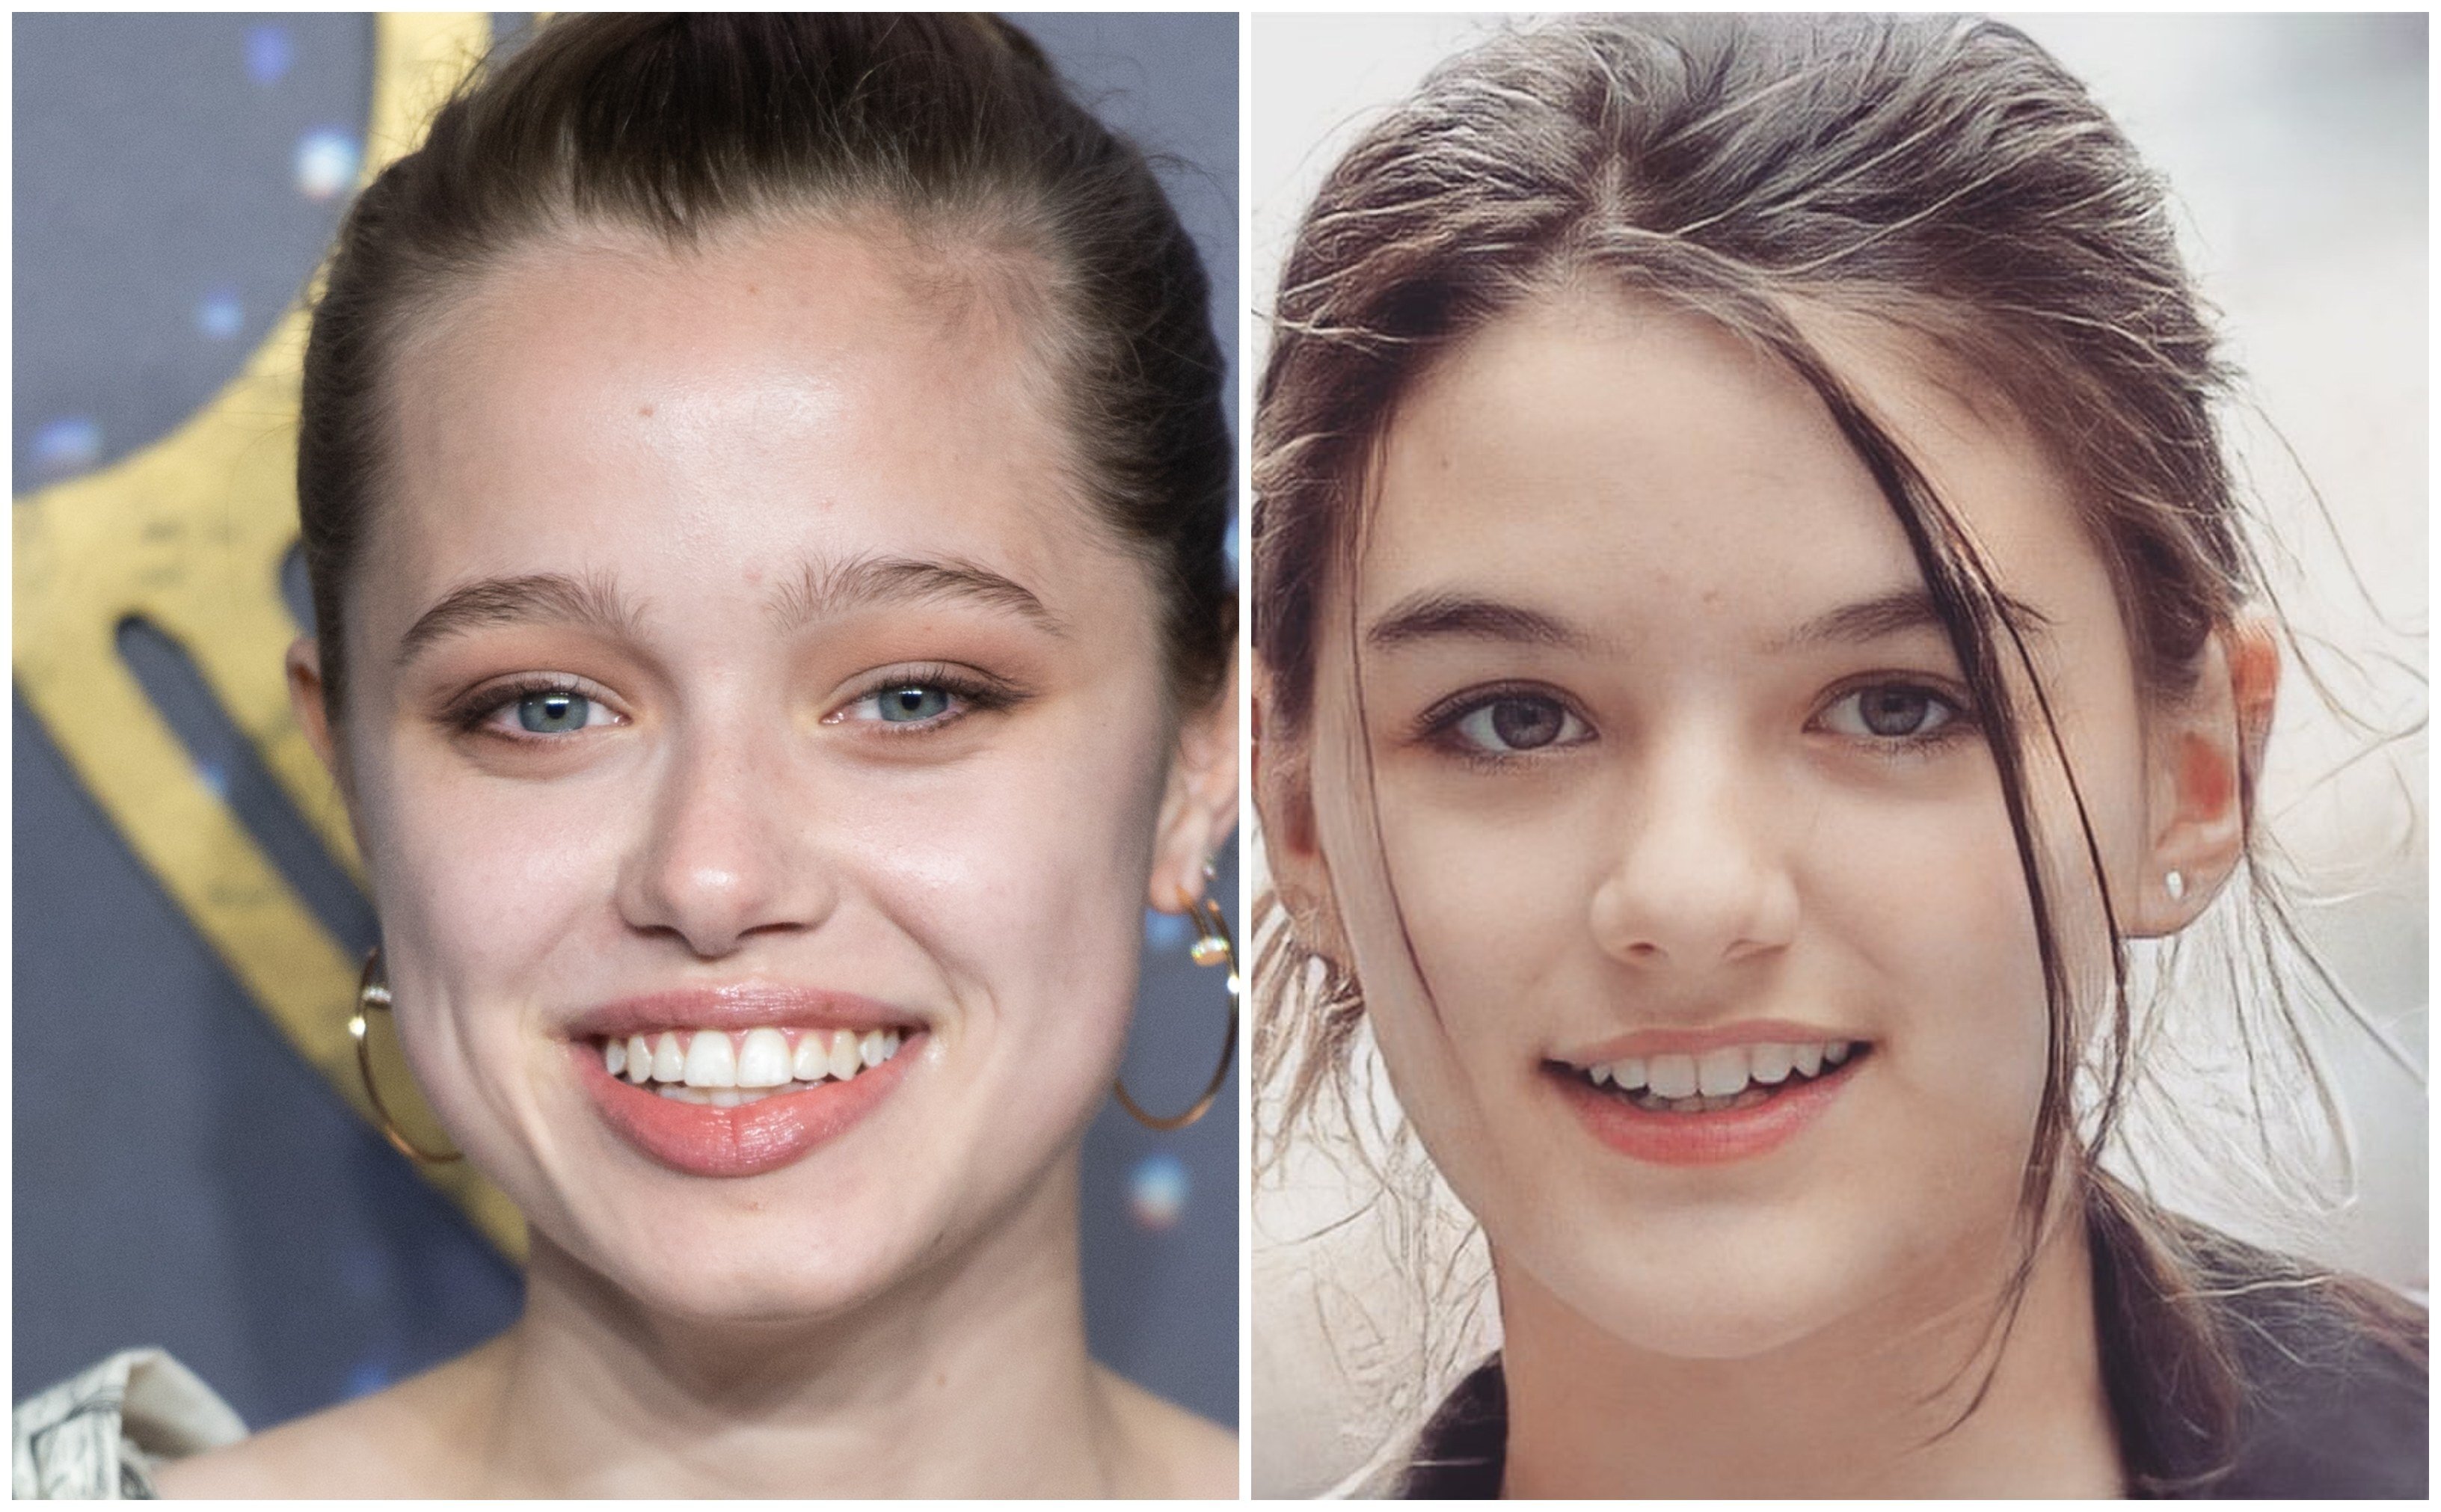 Shiloh Jolie-Pitt and Suri Cruise at 15: how do their teenage years compare?  Photos: Getty, @suricruise.official/Instagram